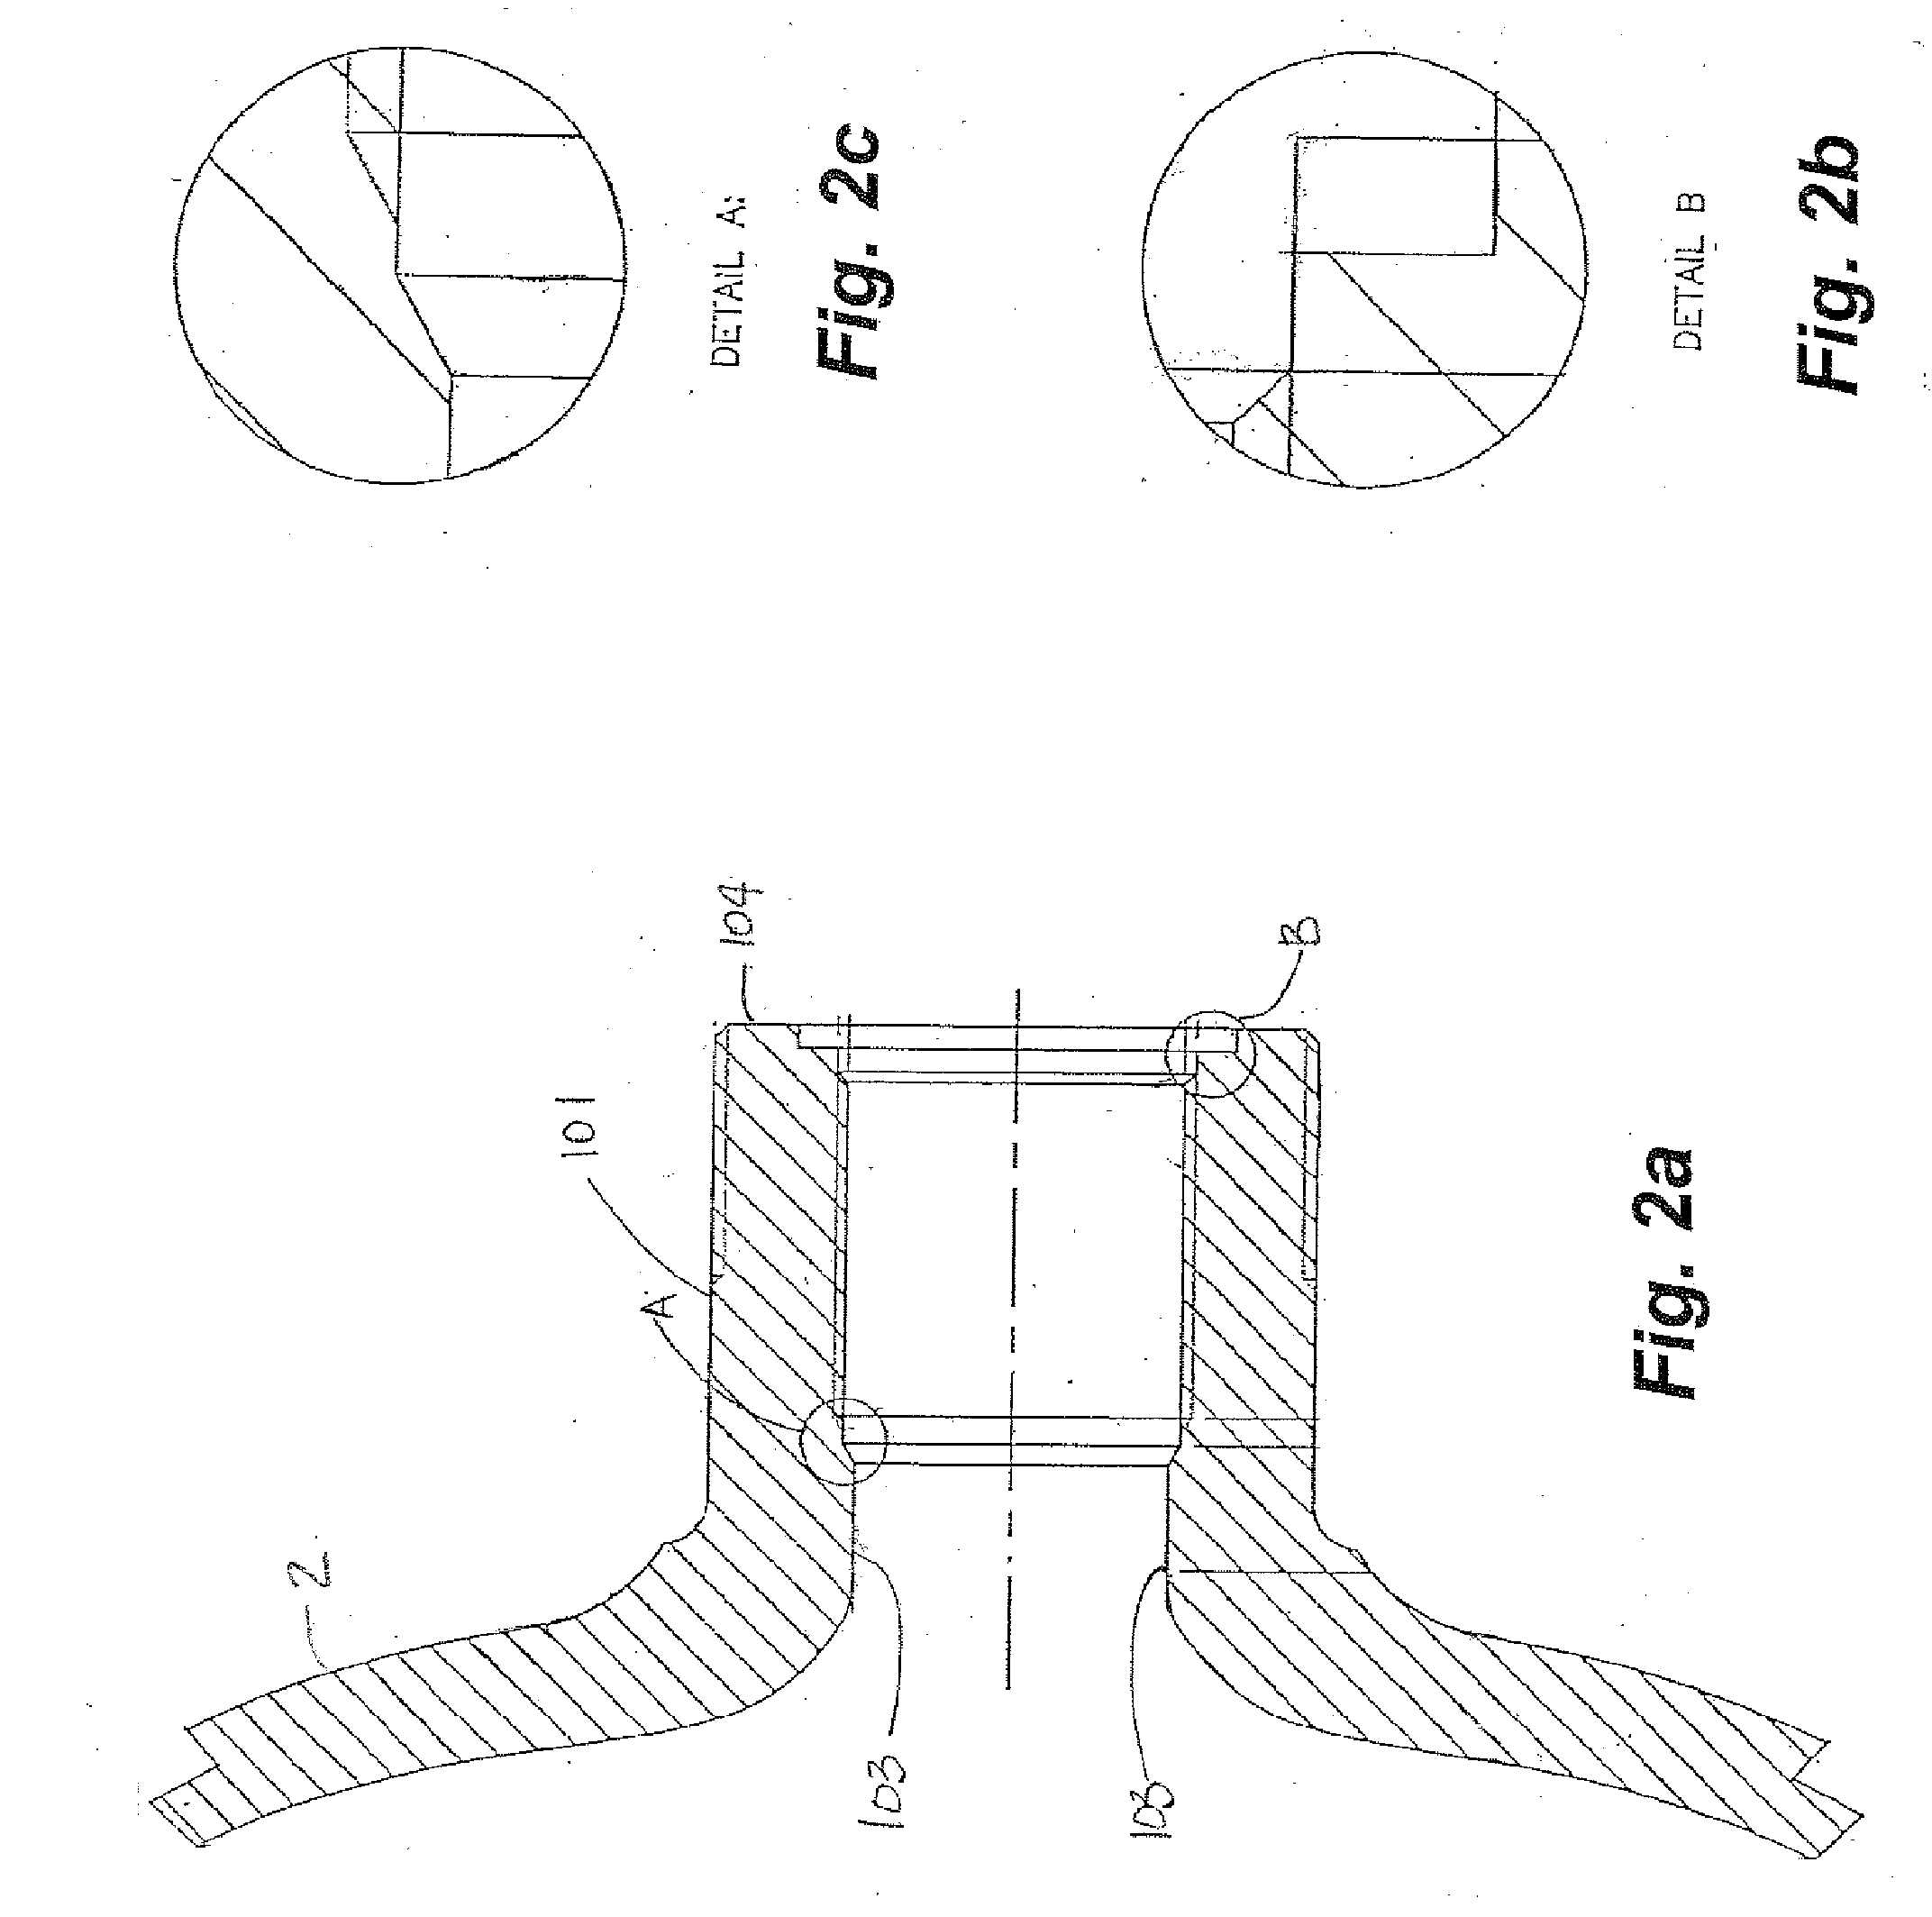 Sealing system and method of determining seal integrity